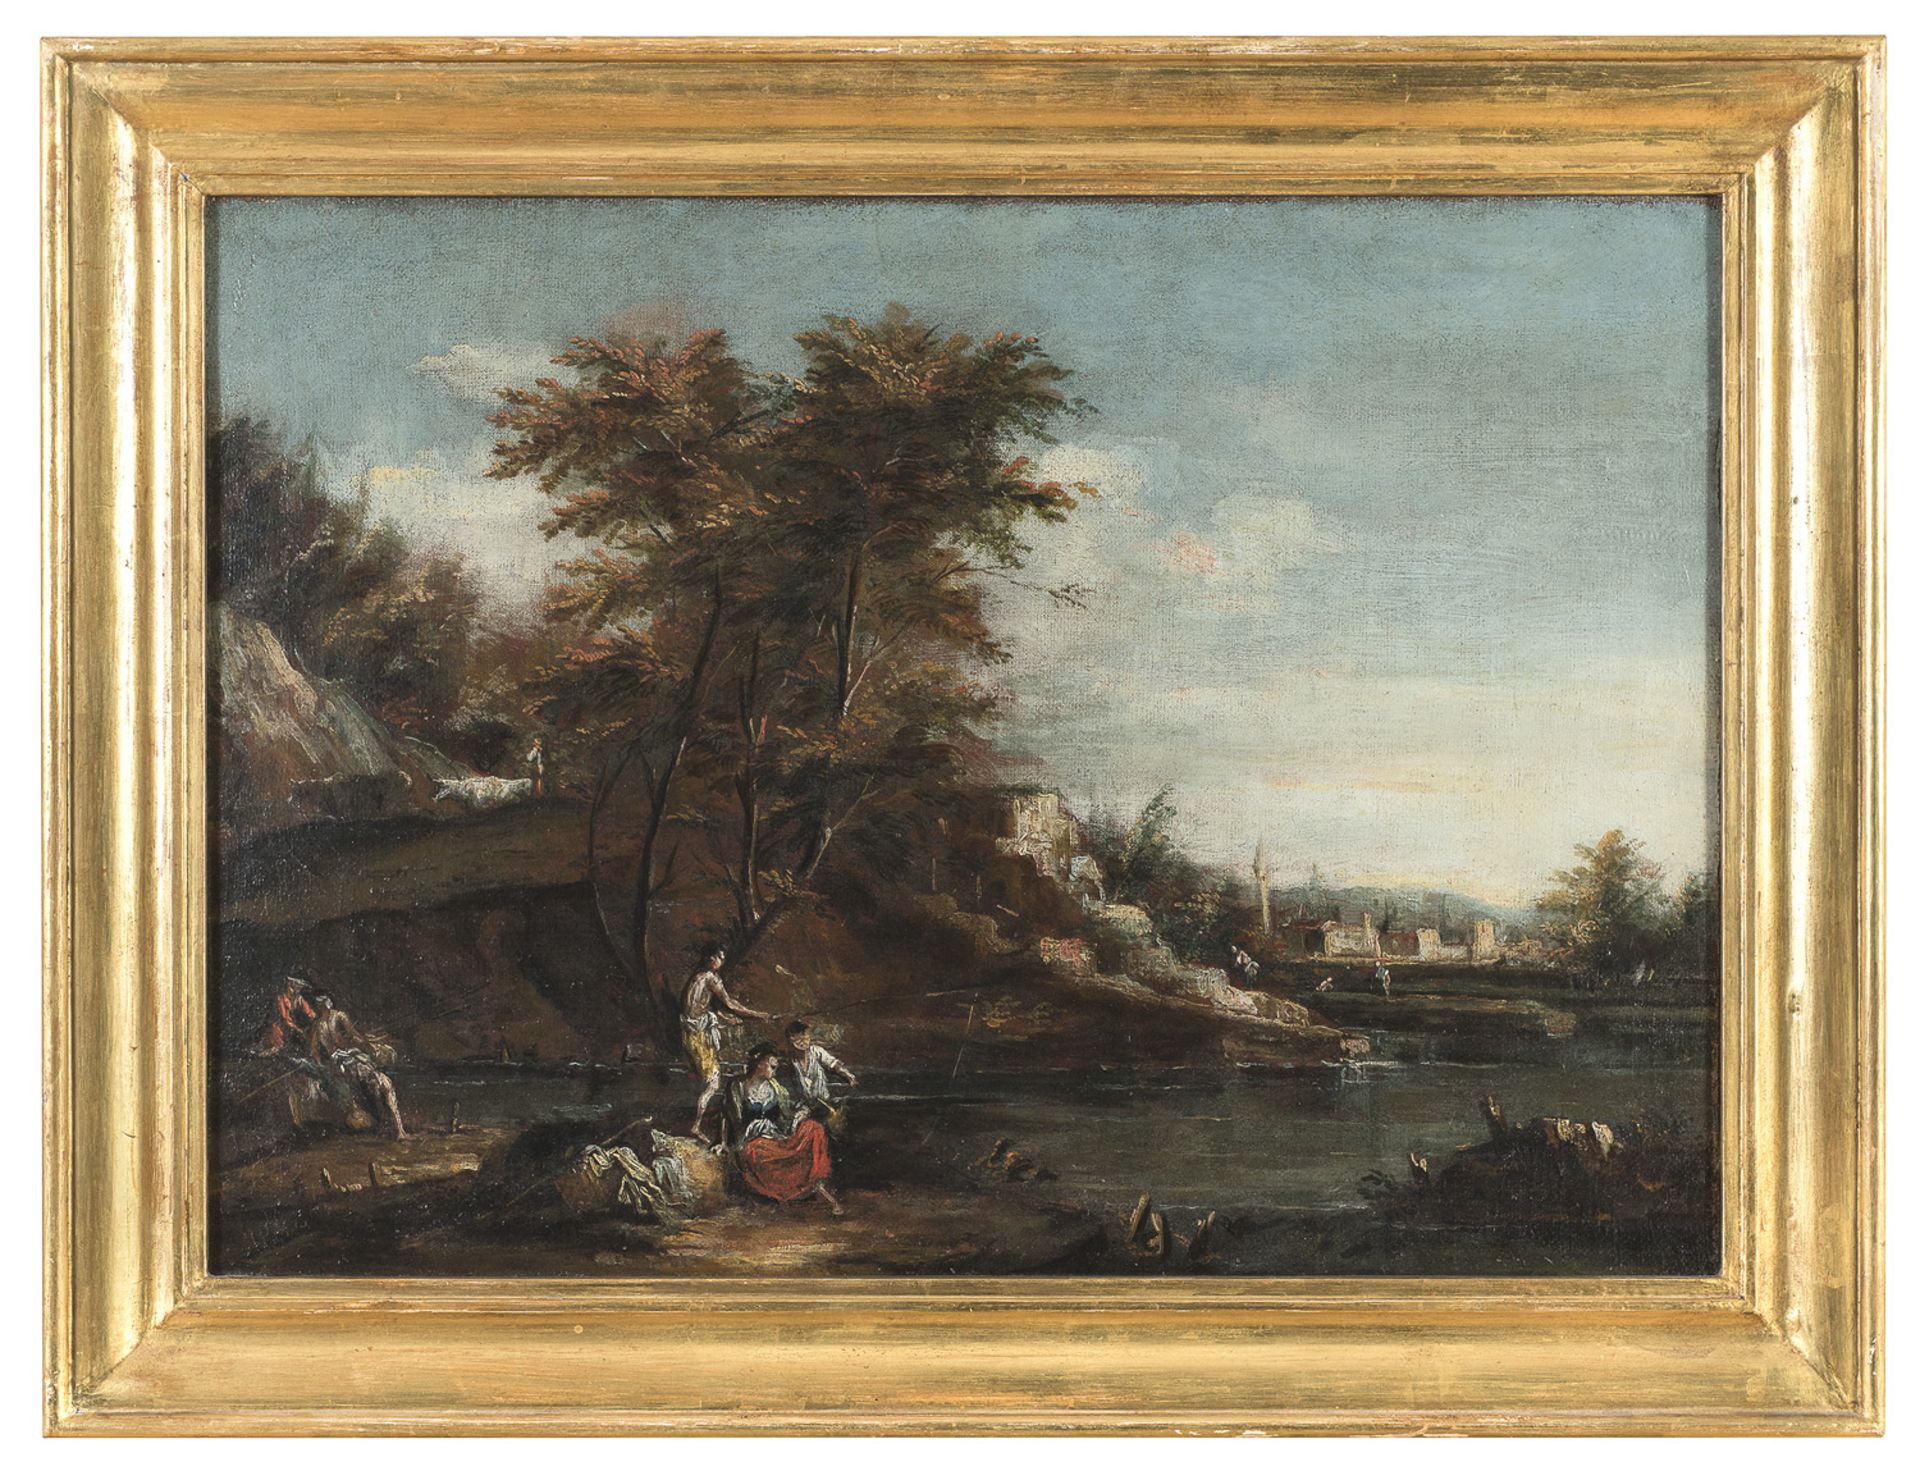 PAIR OF VENETIAN OIL PAINTINGS OF LANDSCAPES 18TH CENTURY